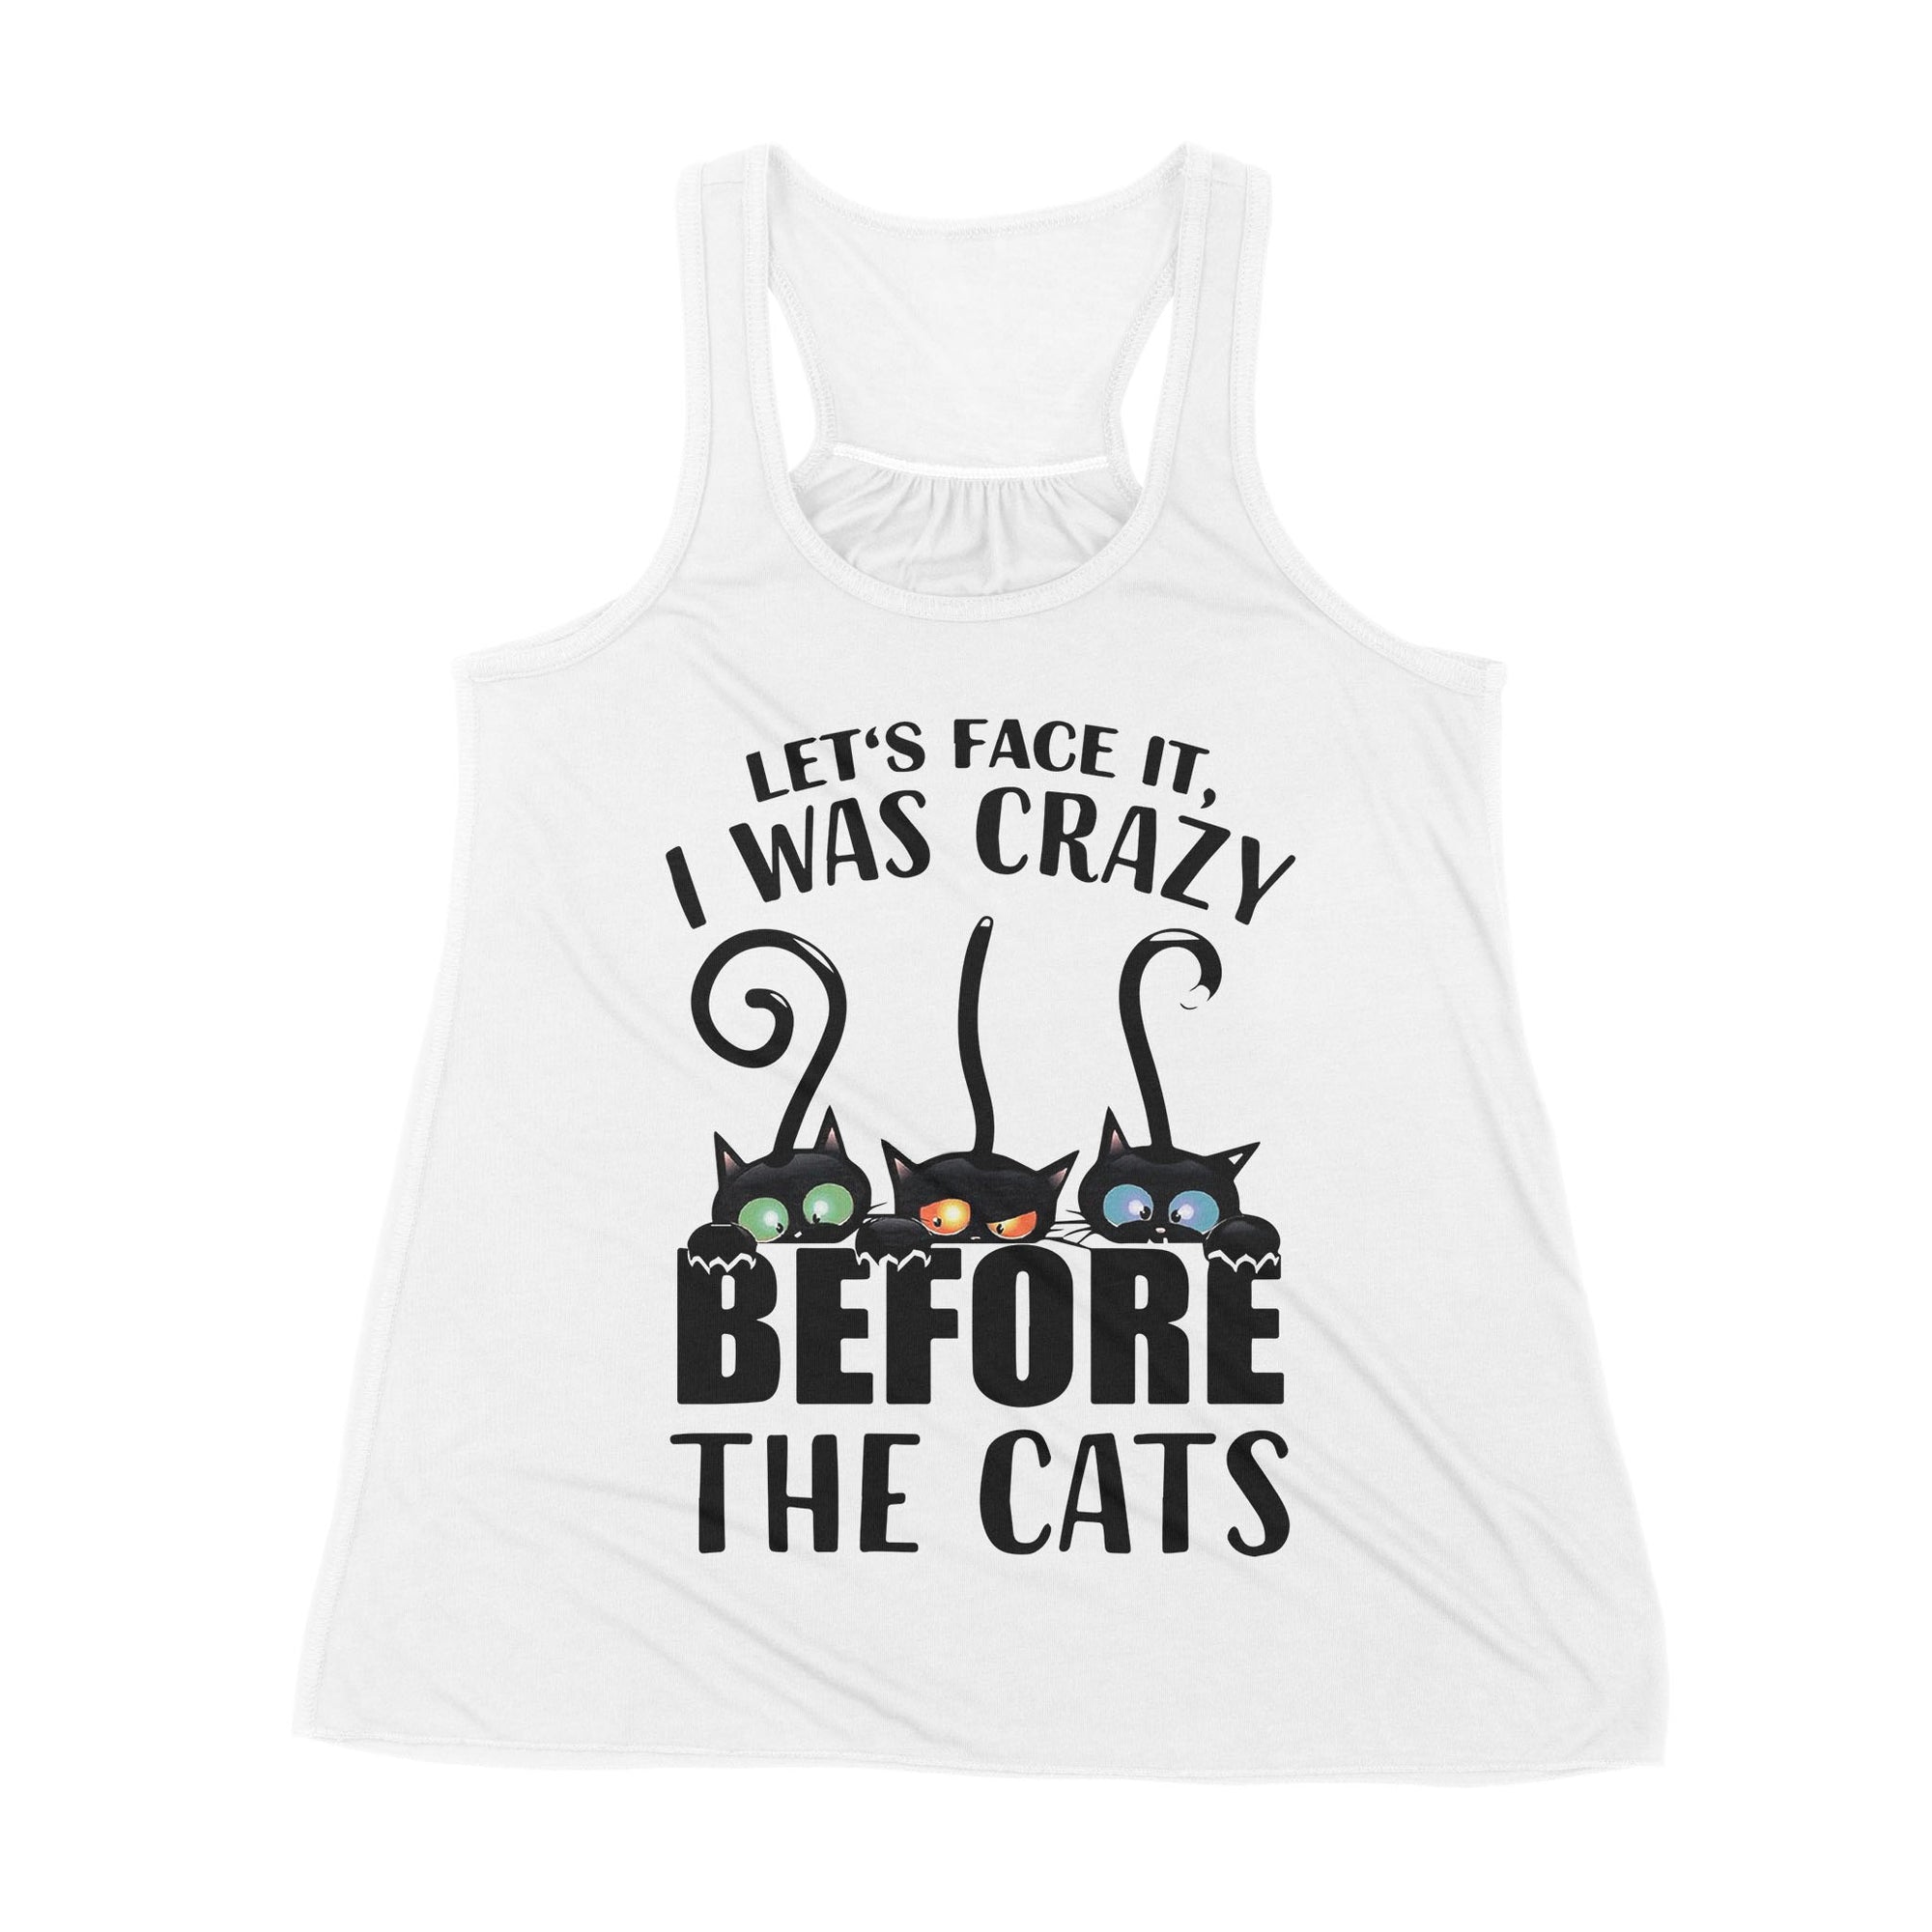 Let's Face It I Was Crazy Before The Cats - Premium Women's Tank